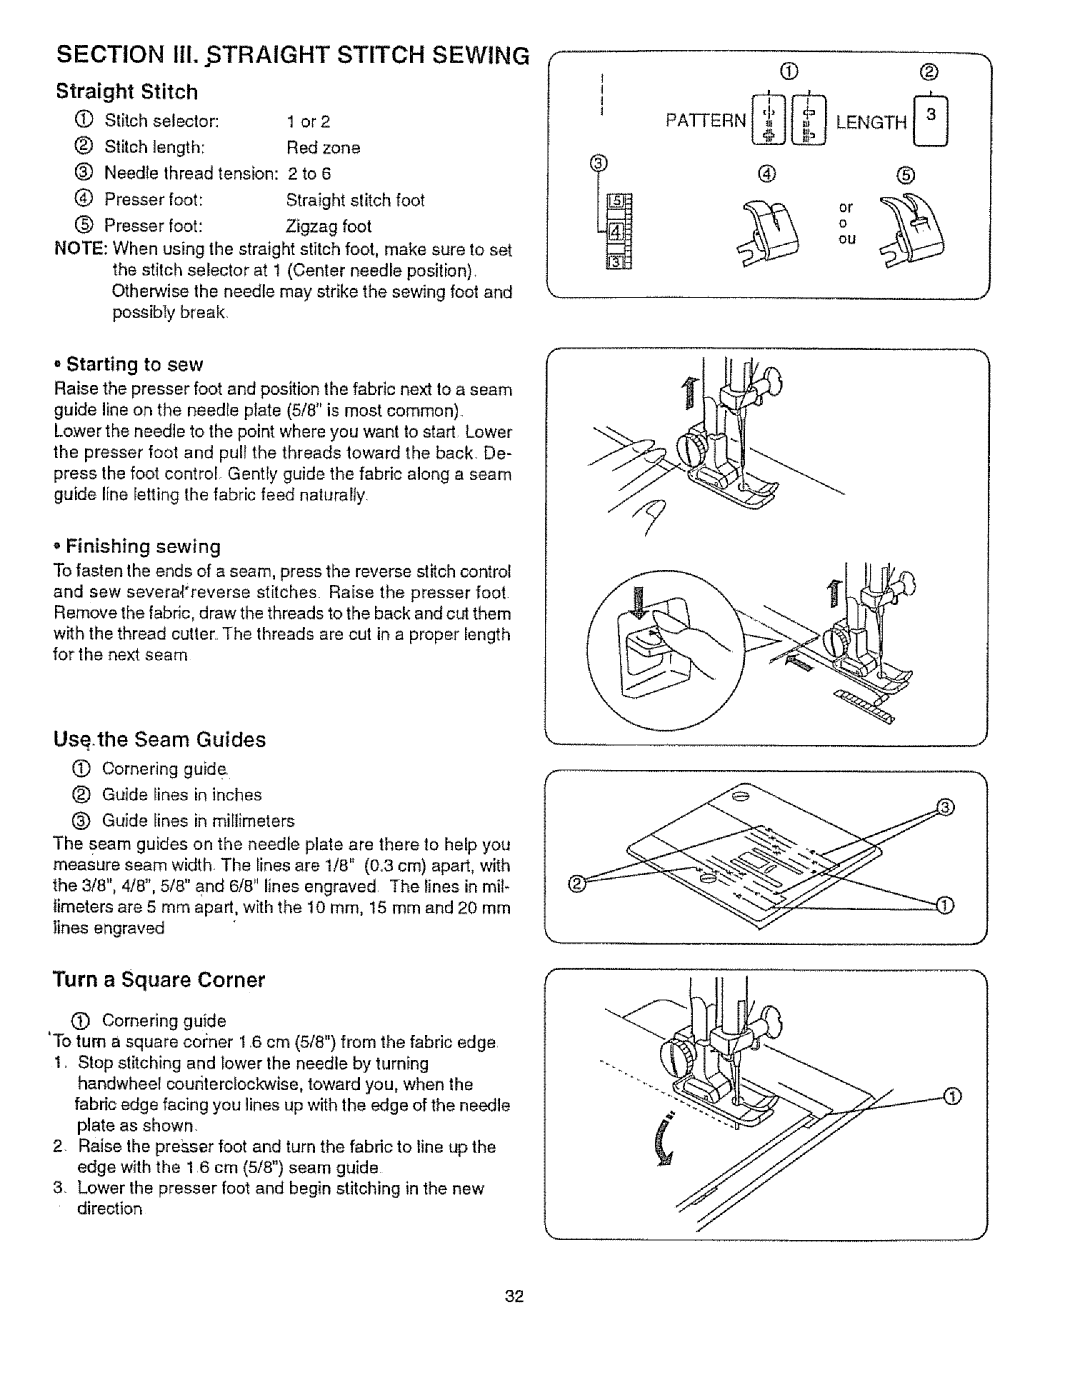 Sears 385.12912, 385.12916 owner manual Section III..STRAIGHT Stitch Sewing, Use.the Seam Guides, Turn Square Corner 